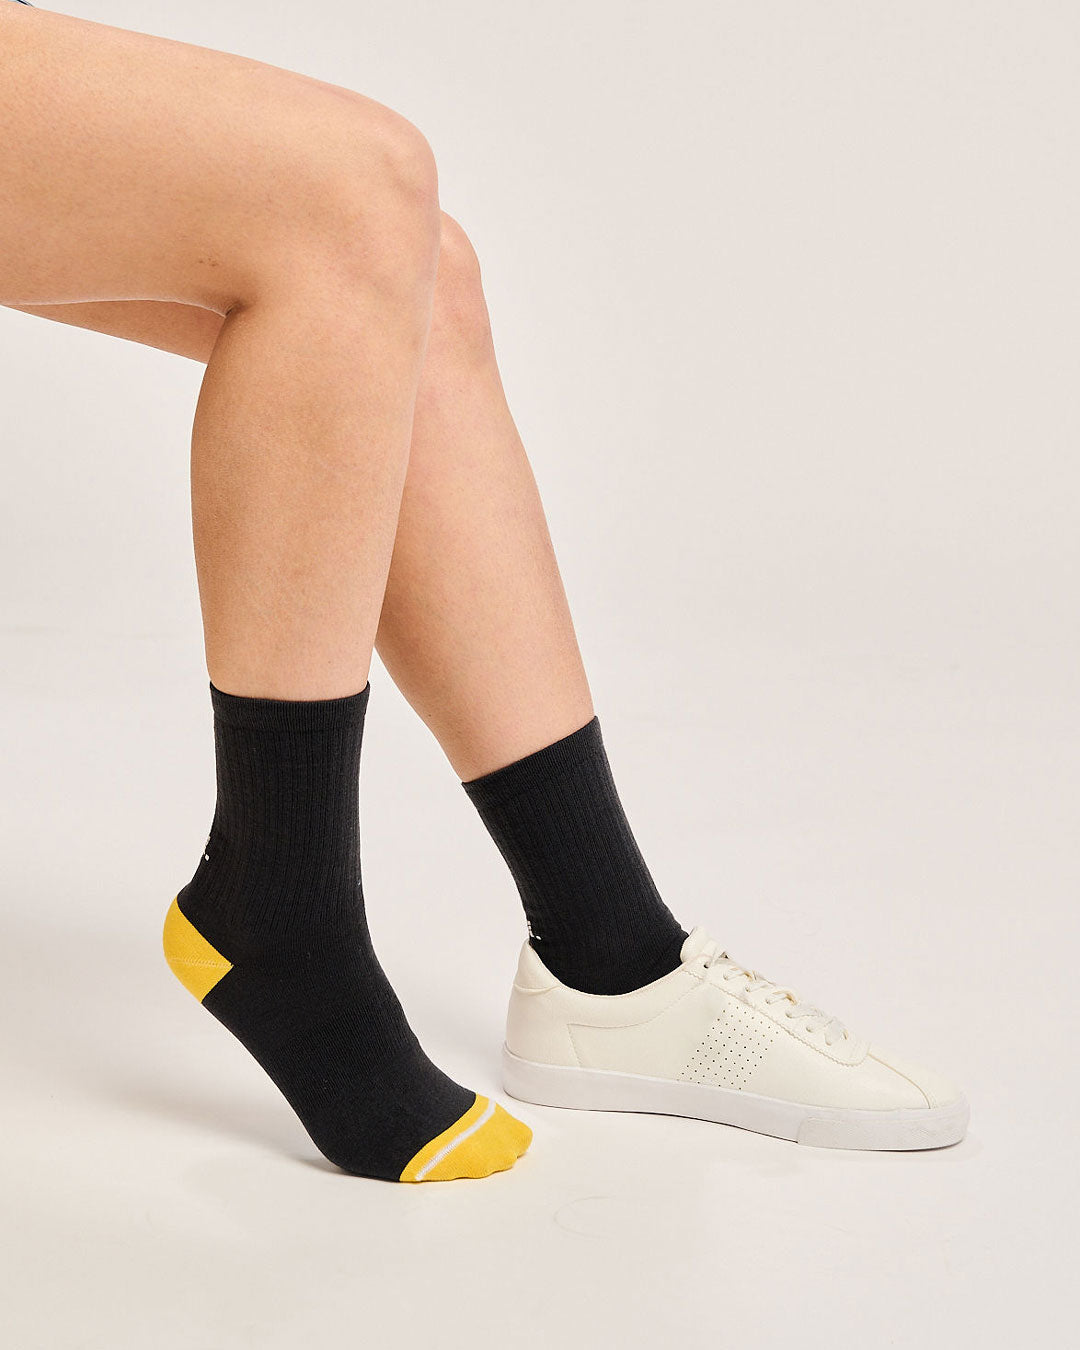 Black athletic ribbed socks. Sustainable socks with seamless toes